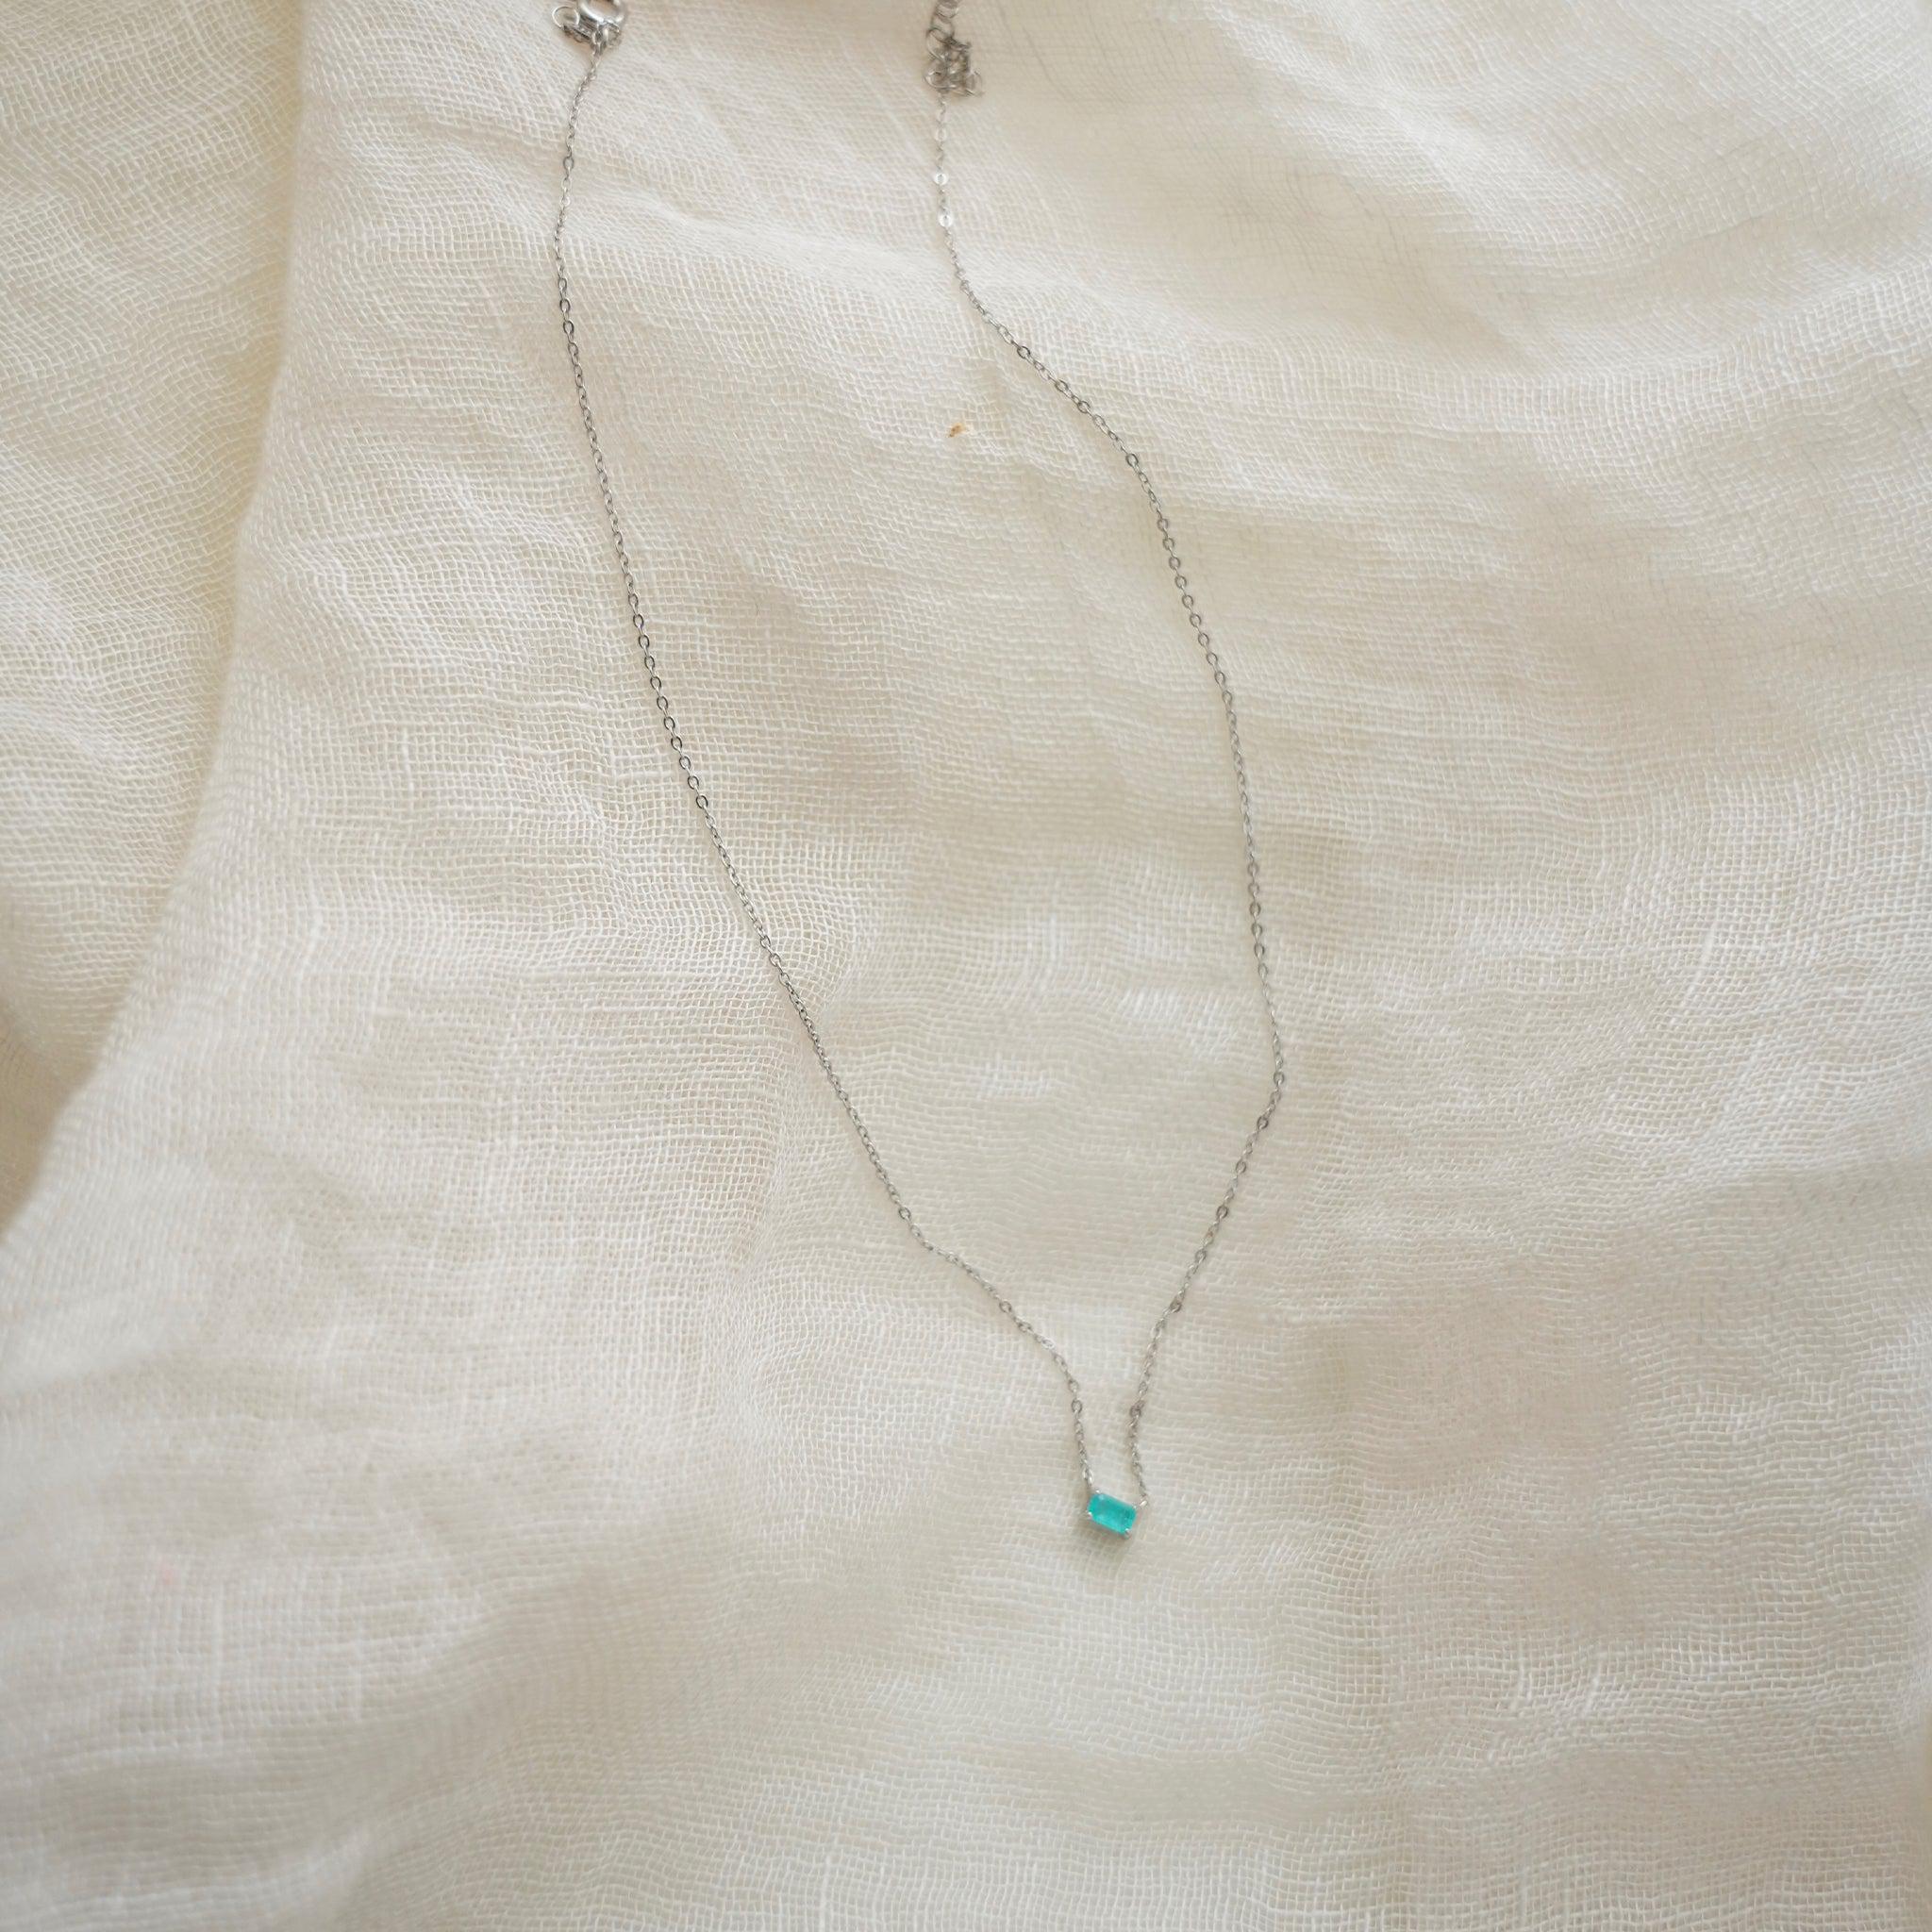 Sterling Silver Necklace With Natural Stone